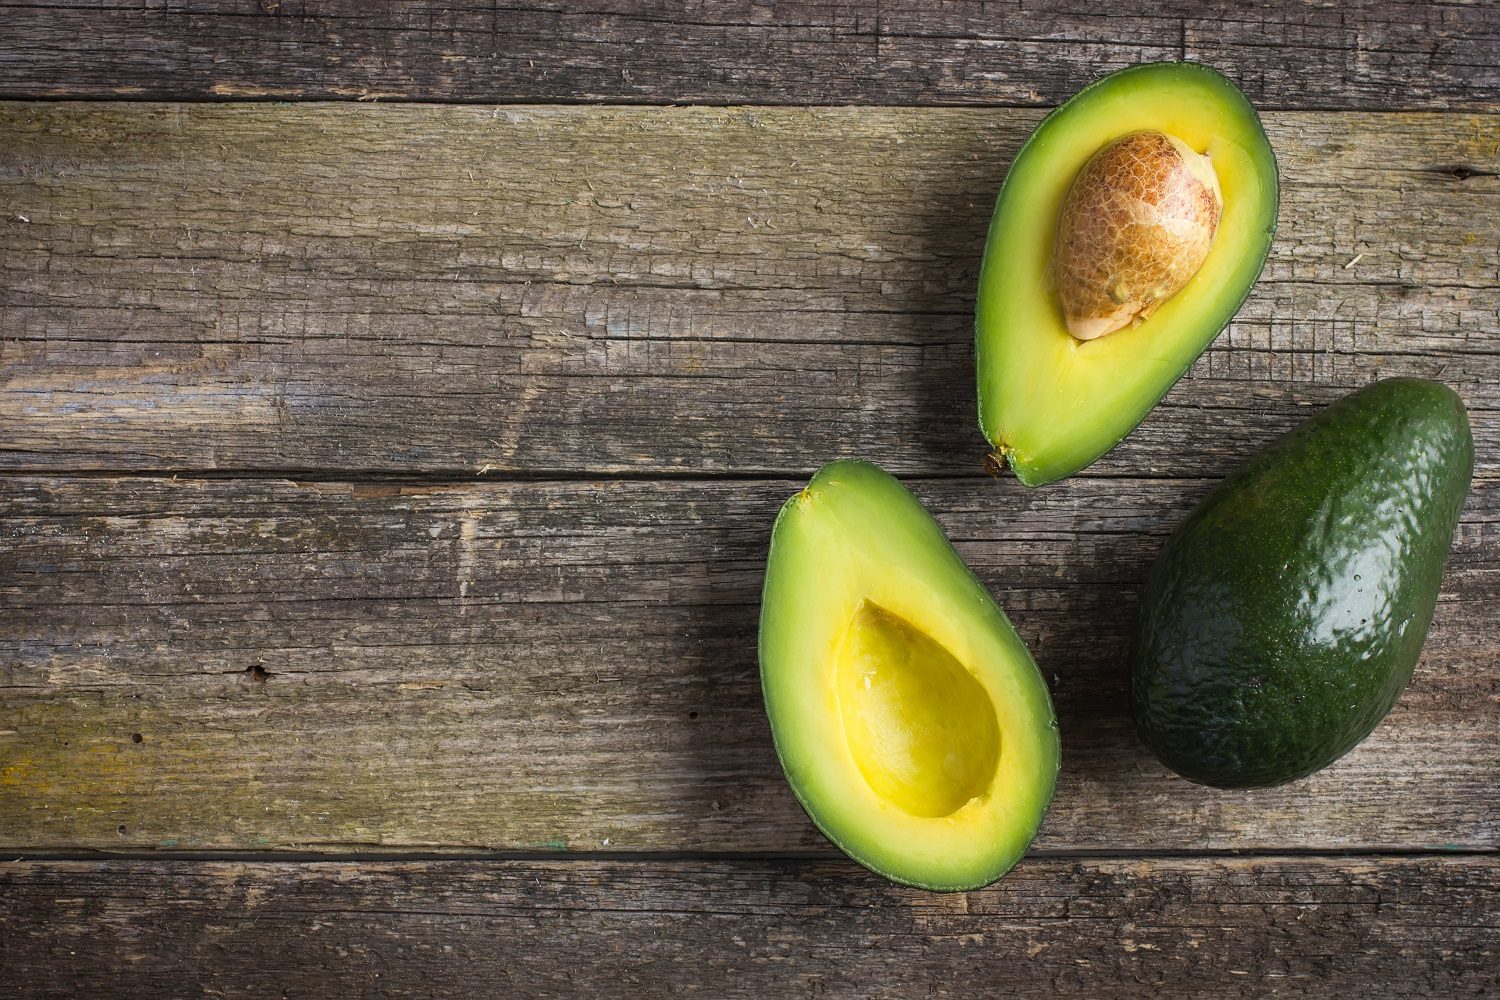 Where does the avocado fruit grow in India